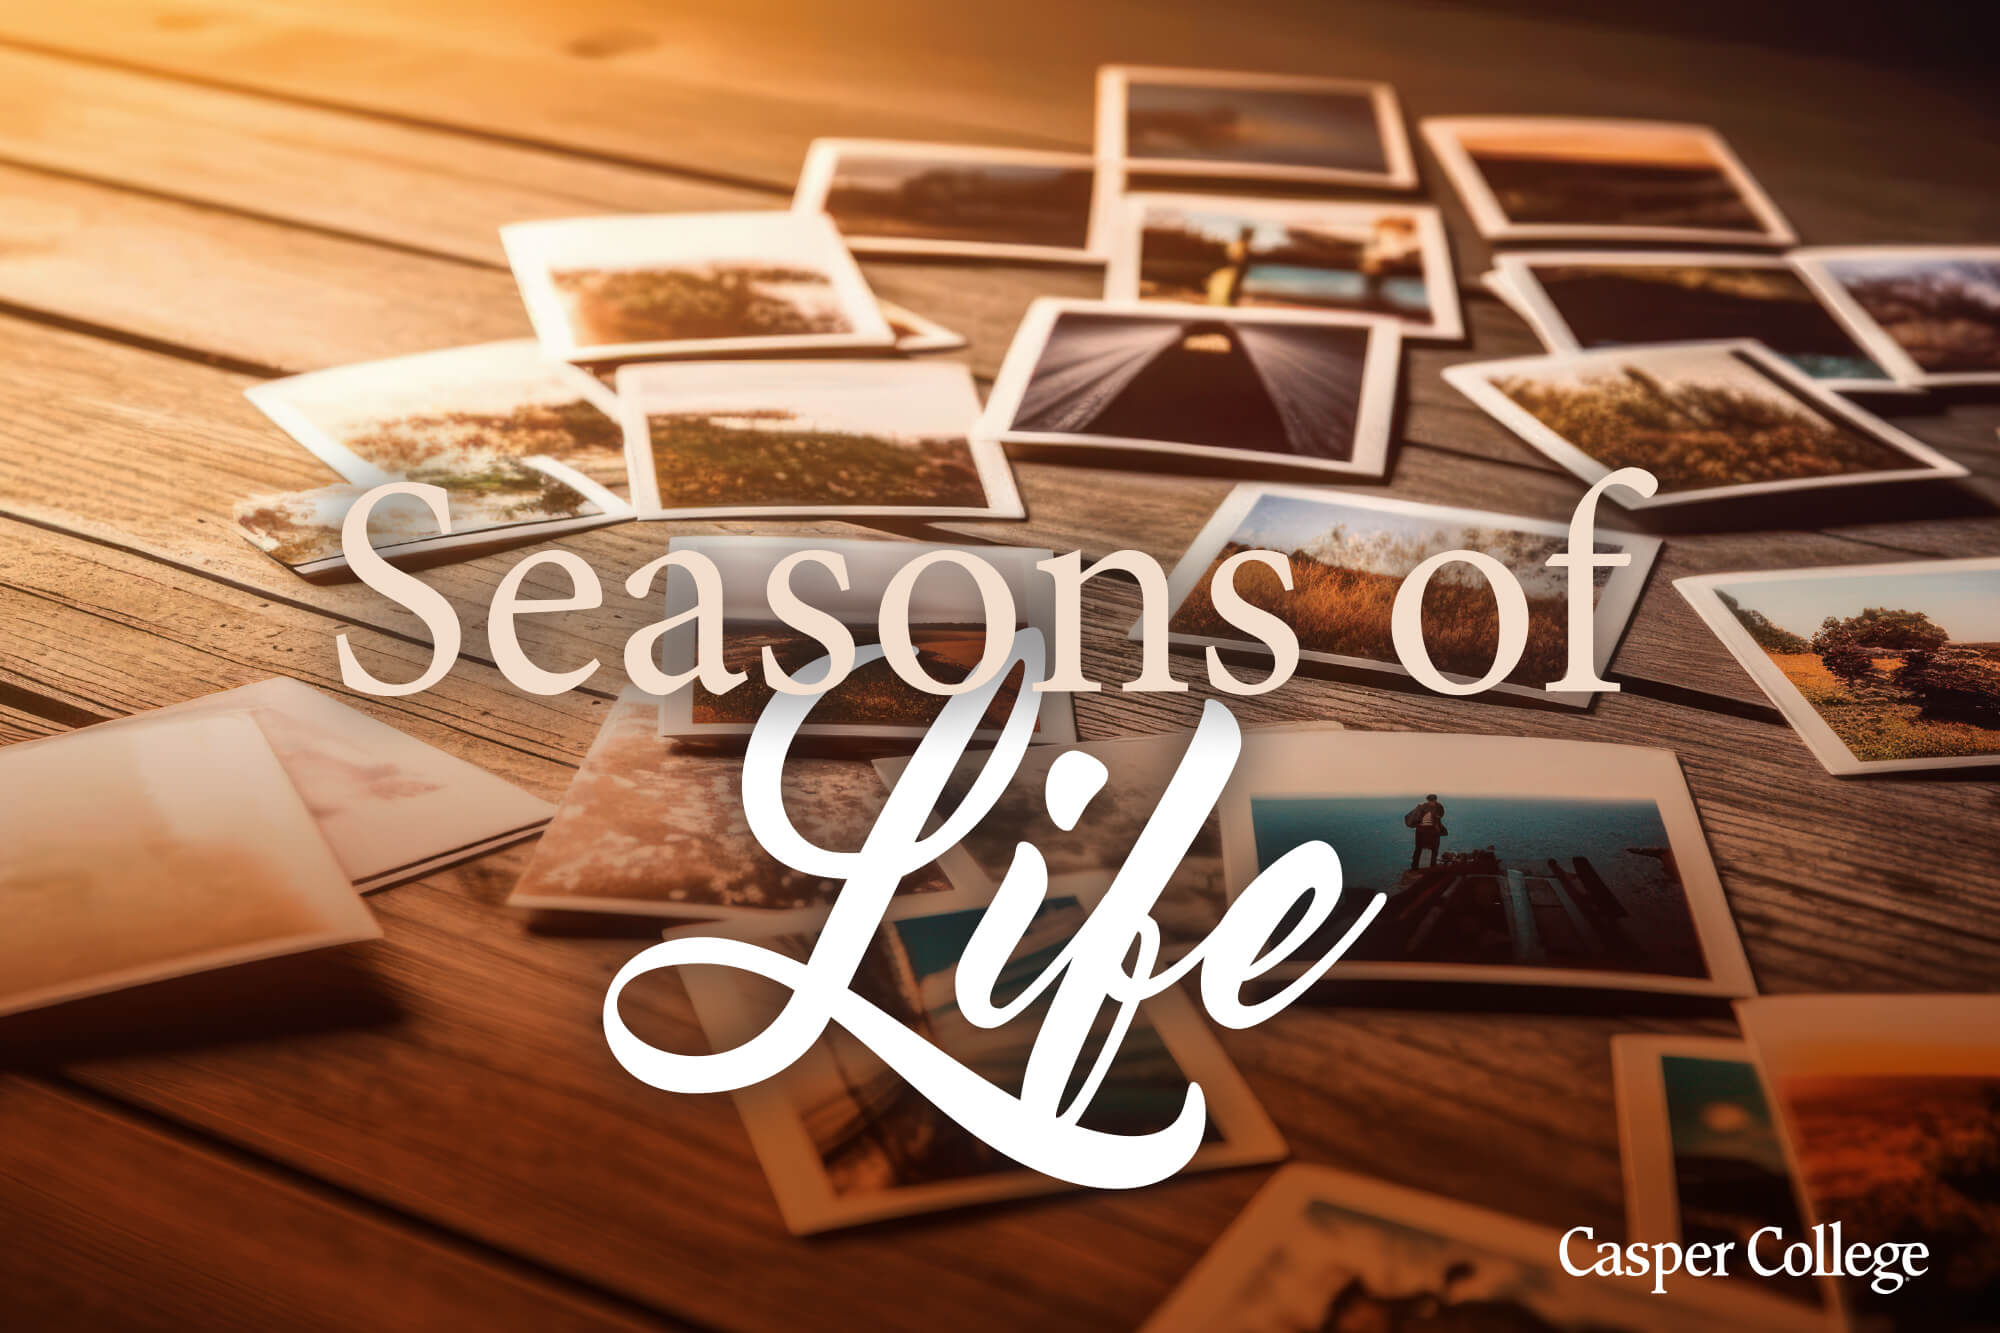 Image for "Seasons of Life" press release.